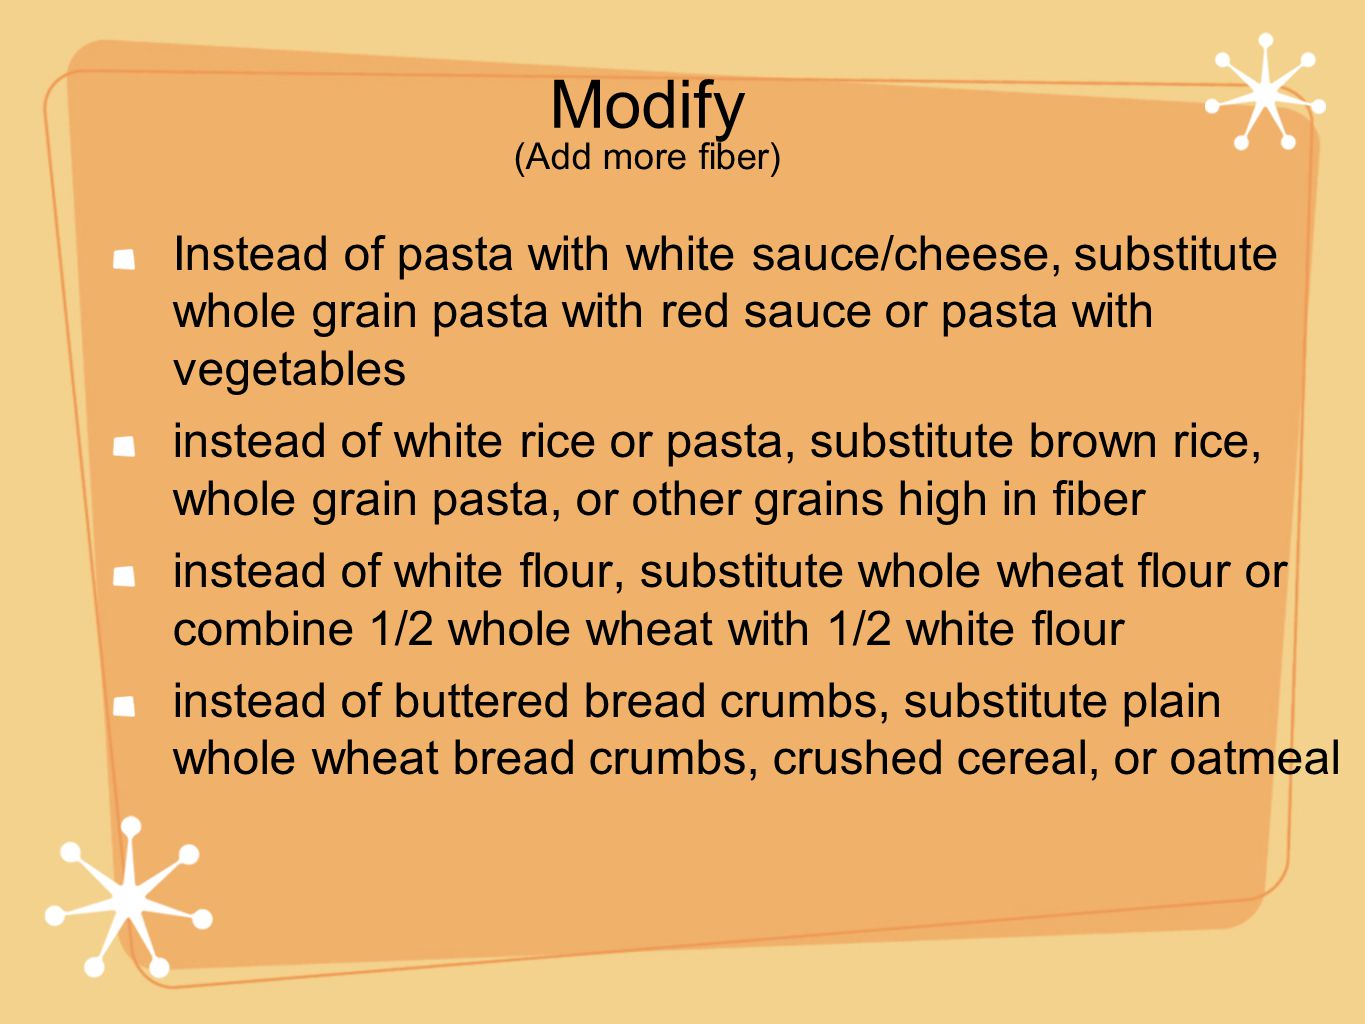 Modify Instead of pasta with white sauce/cheese, substitute whole grain pasta with red sauce or pasta with vegetables instead of white rice or pasta, substitute brown rice, whole grain pasta, or other grains high in fiber instead of white flour, substitute whole wheat flour or combine 1/2 whole wheat with 1/2 white flour instead of buttered bread crumbs, substitute plain whole wheat bread crumbs, crushed cereal, or oatmeal (Add more fiber)